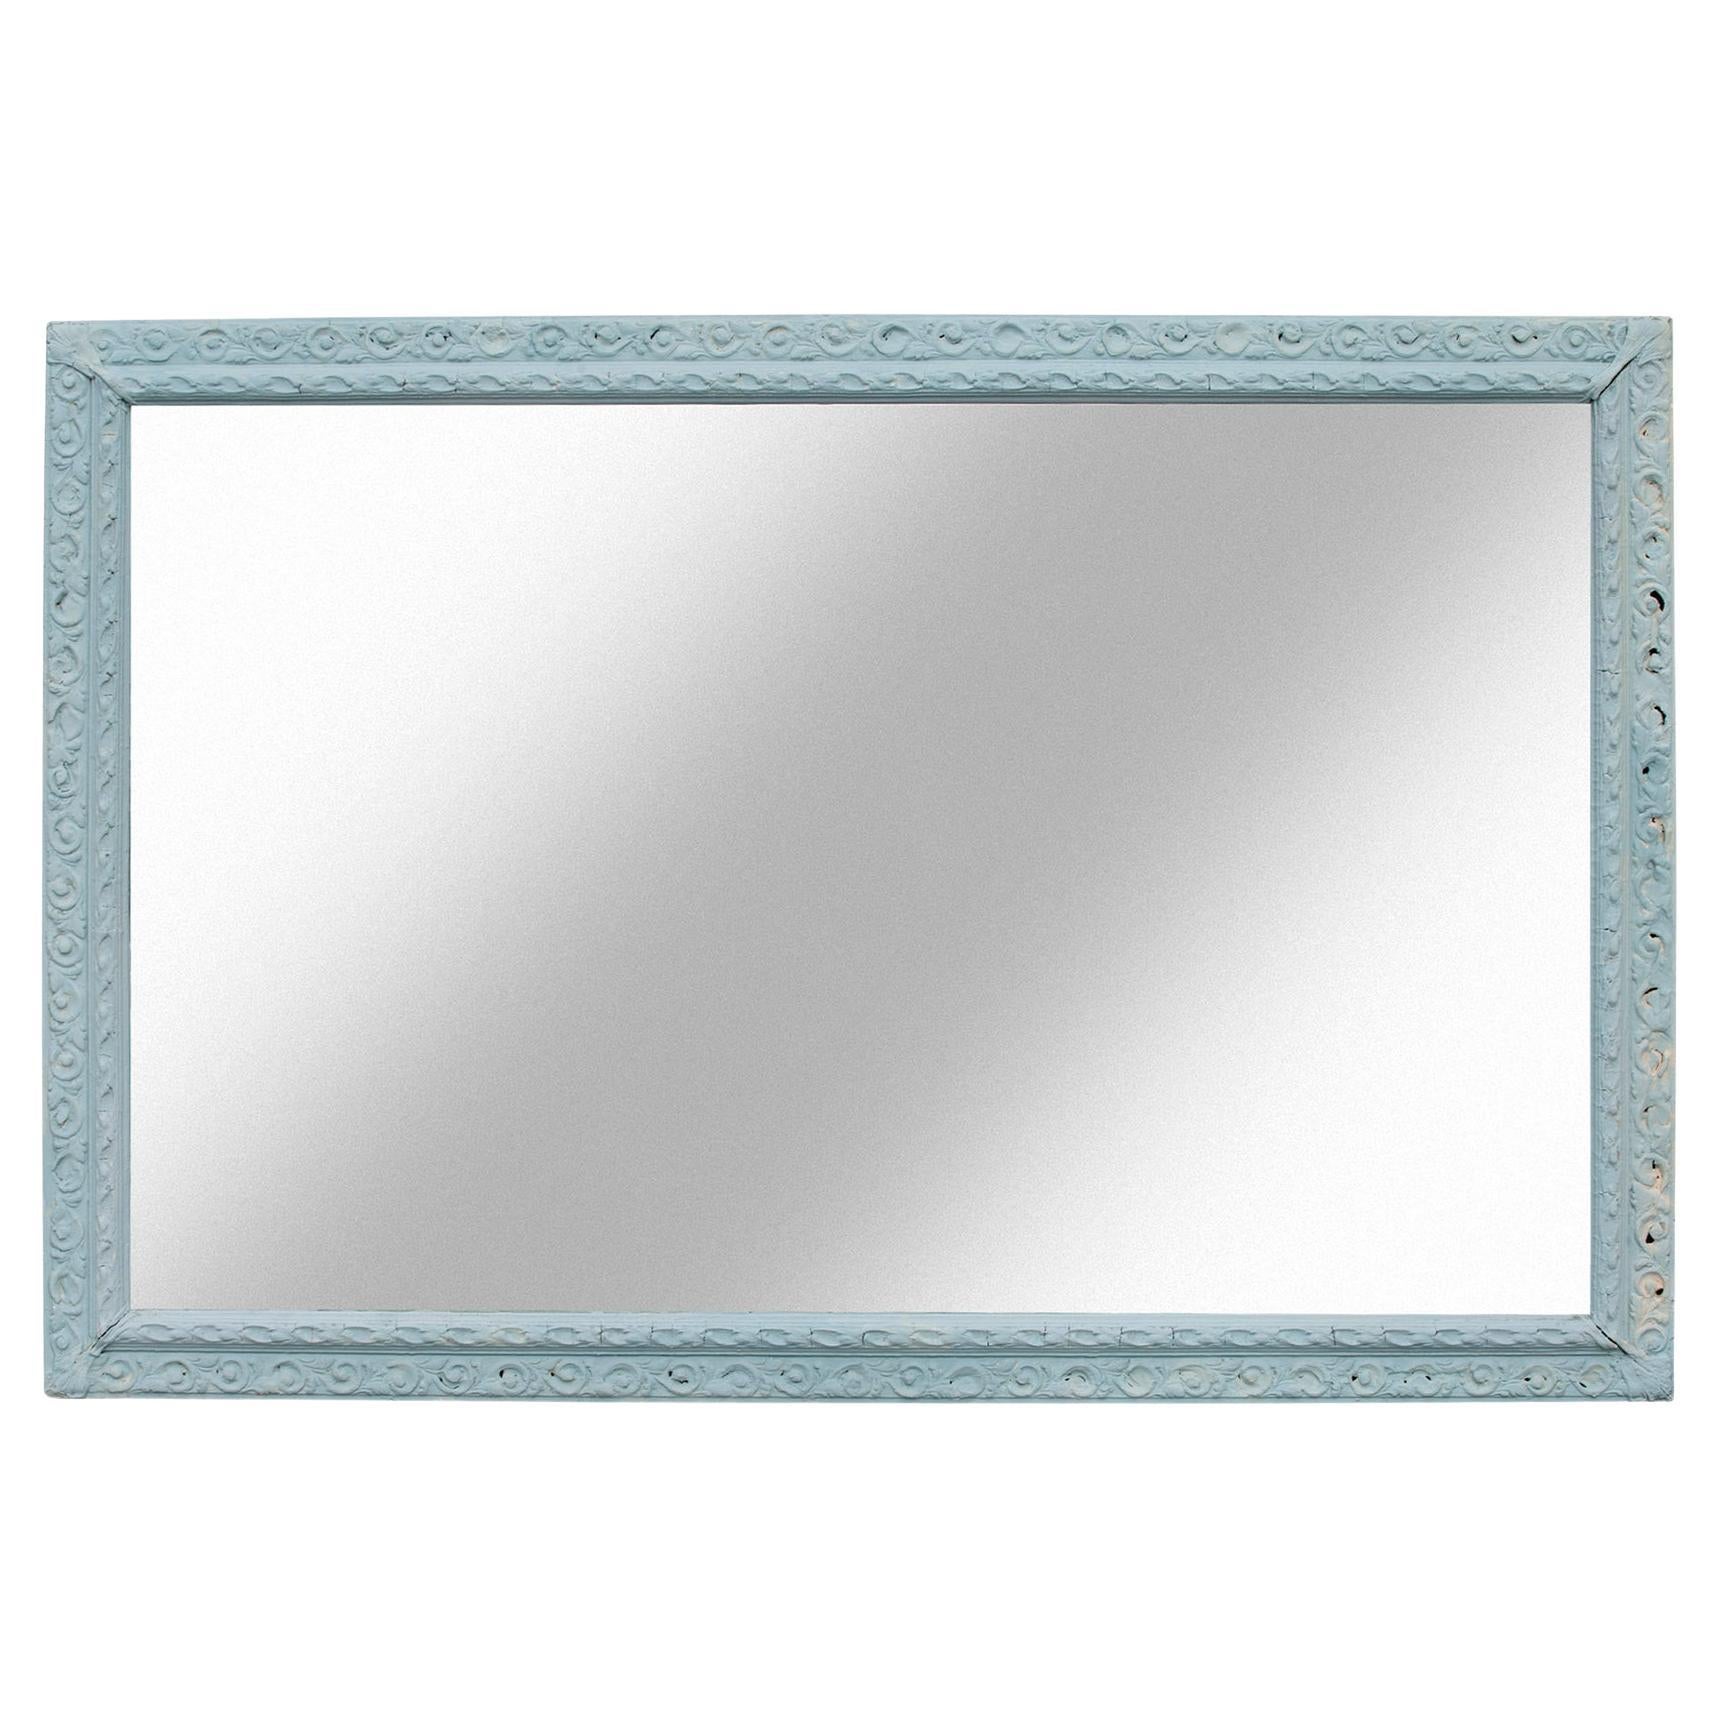 Large Victorian Style Pale Blue Pier Mirror For Sale